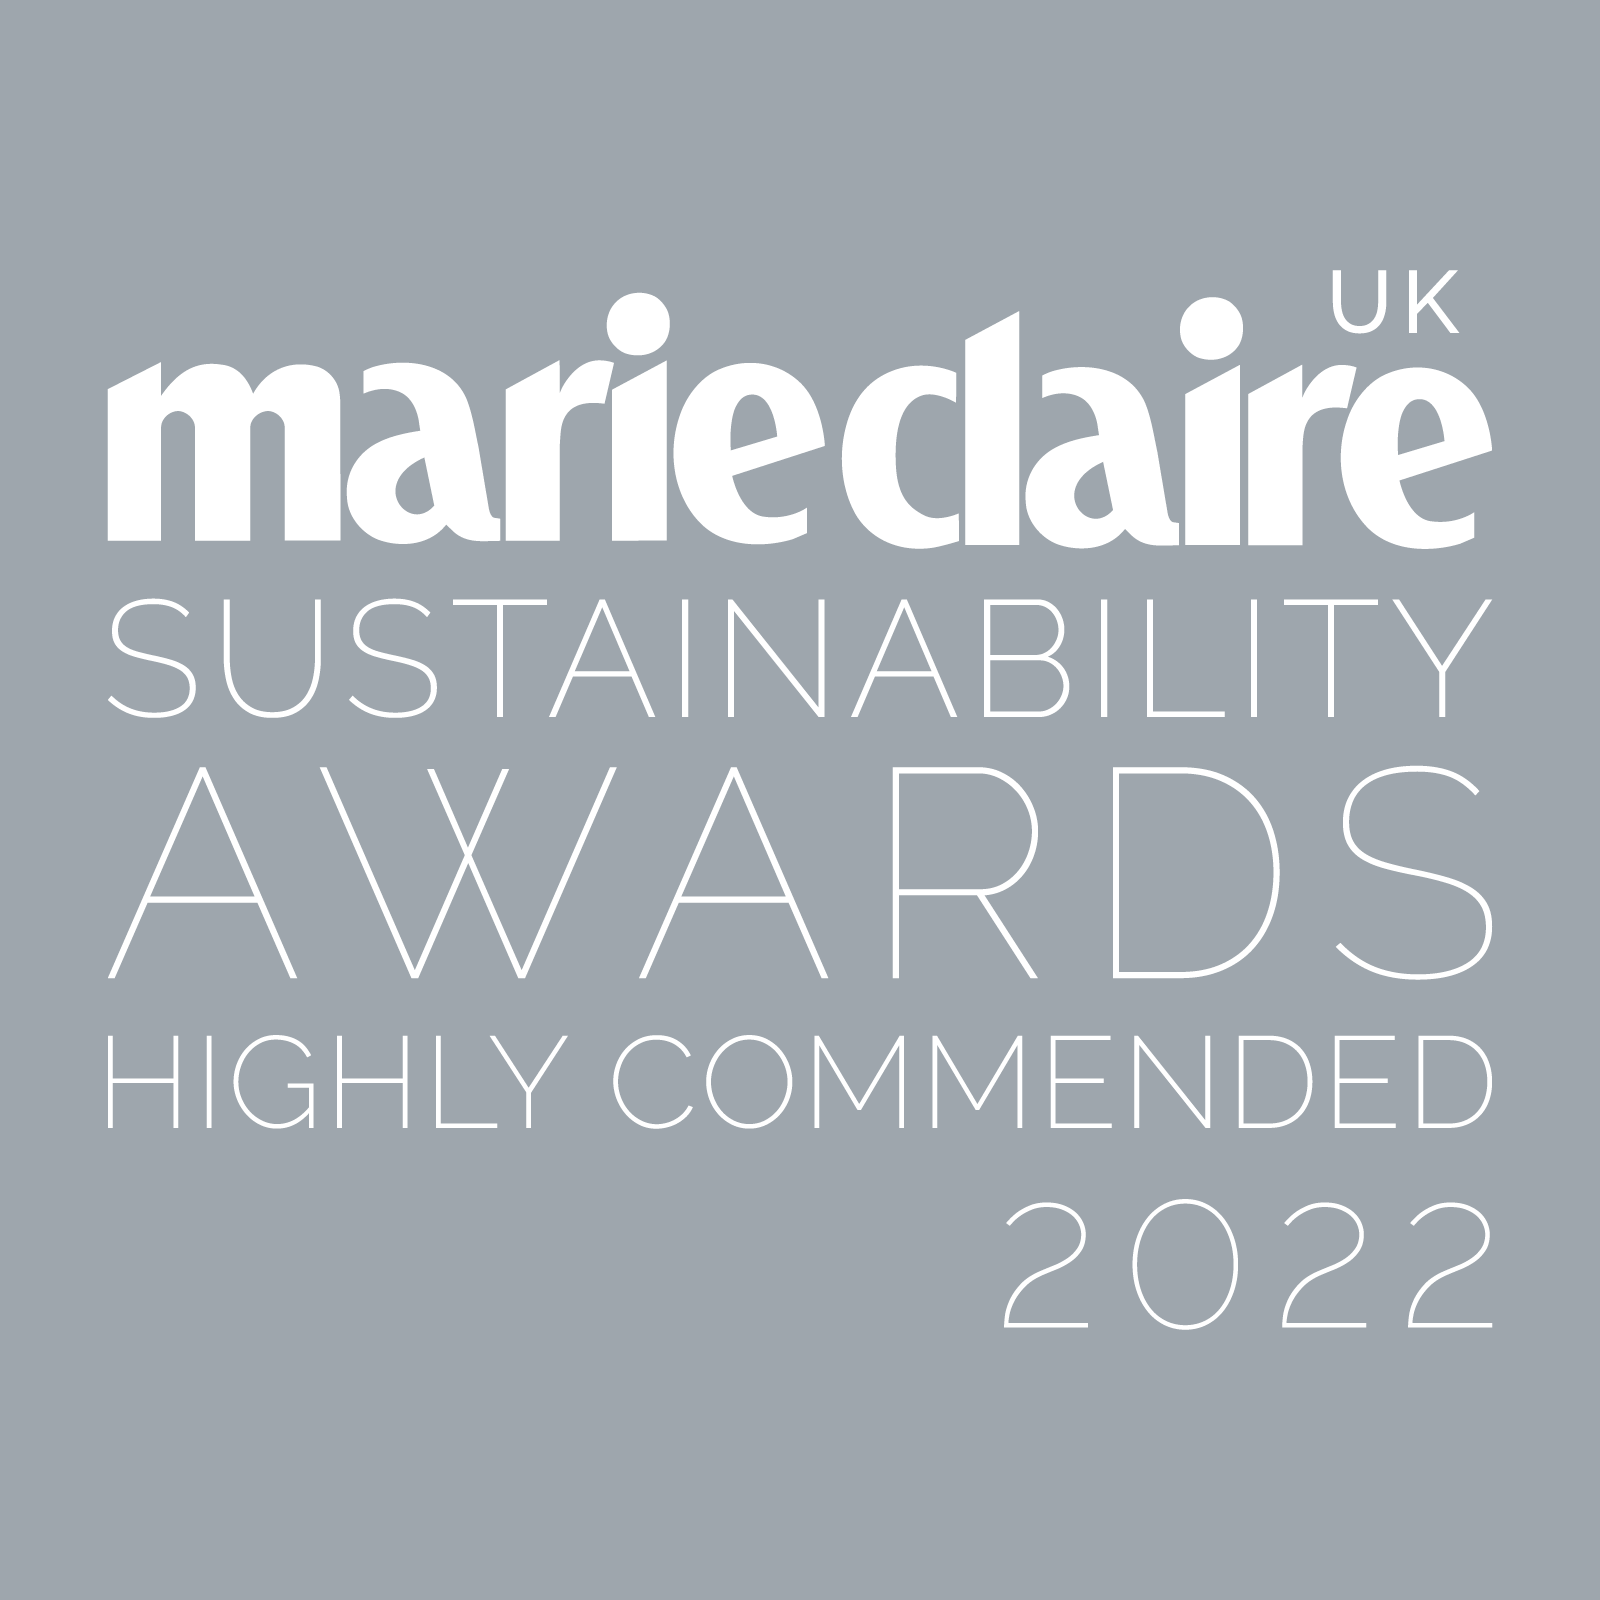 marie claire Sustainability Awards Highly Commended 2022